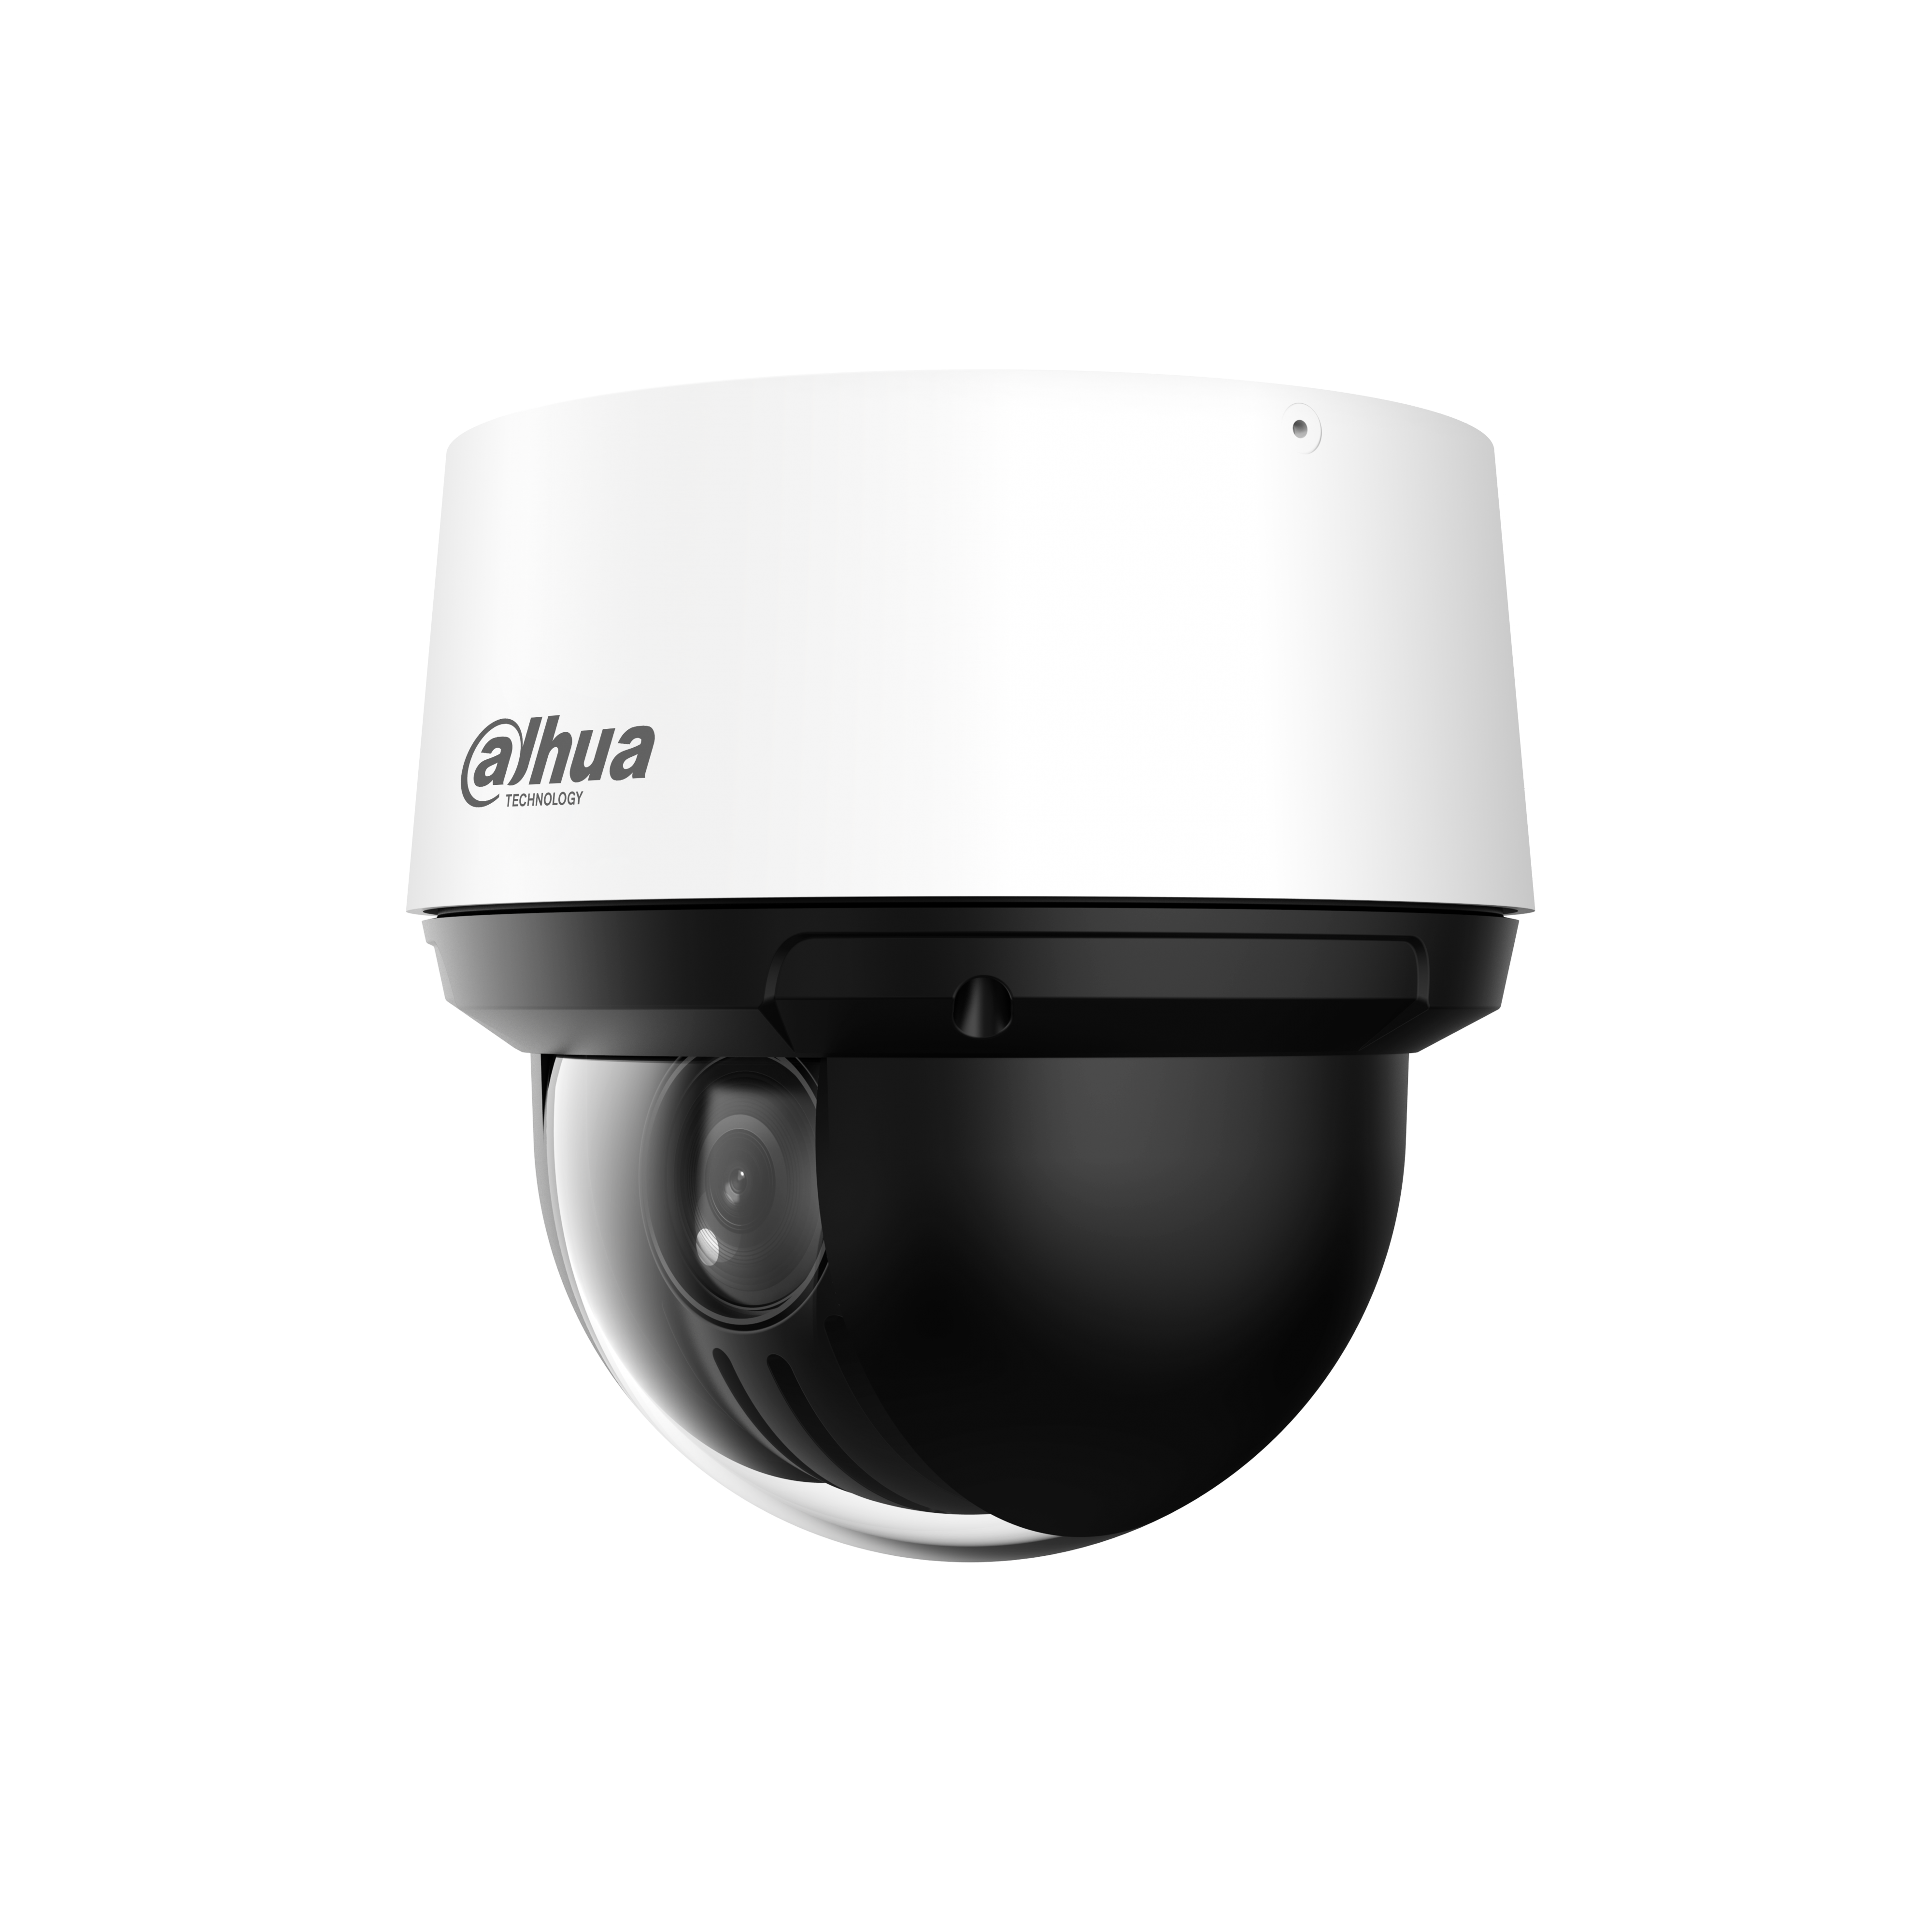 WIZSENSE SERIES IP CAMERA WHITE AI AUTO TRACKING 4MP H.264/4+/5/5+/ MJPEG SPEED DOME PTZ 120 WDR METAL 5-125MMMOTORISED LENS 25X ZOOM STARLIGHT IR 100M POE+ IP66 WITHOUT MIC AUDIO IN AUDIO OUT 2 x ALARM IN 1 x ALARM OUT SUPPORT UP TO 512GB SD 12VDC